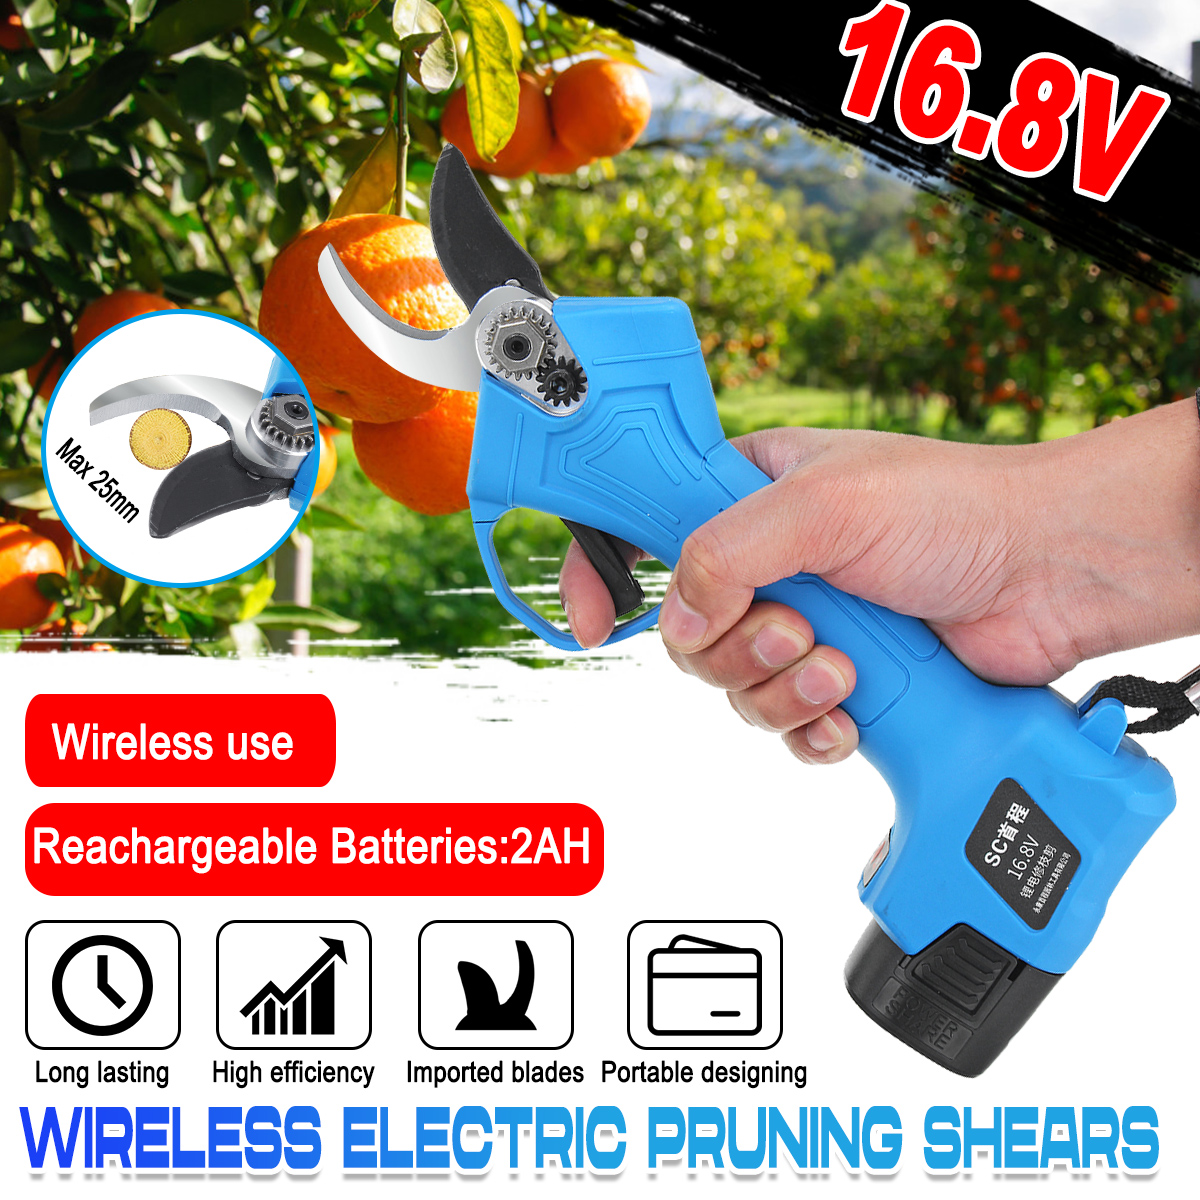 168V-Wireless-25mm-Rechargeable-Electric-Pruning-Shears-Scissors-Branch-Tree-Cutting-Trimming-Tools-1656246-1